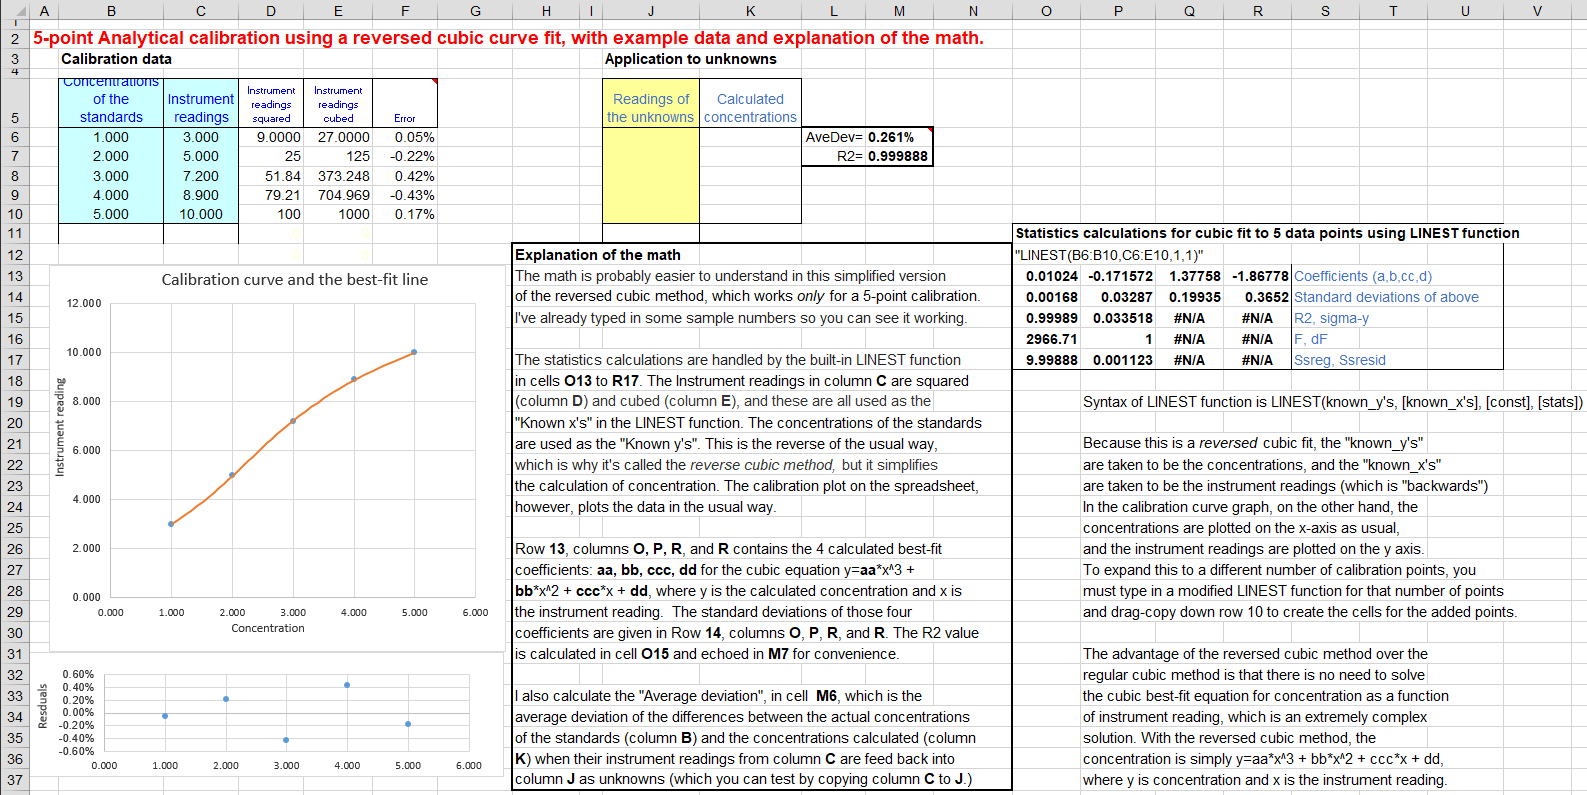 Spreadsheet Modeling Online Course Excel 2013 Answers Inside Worksheet For Analytical Calibration Curve